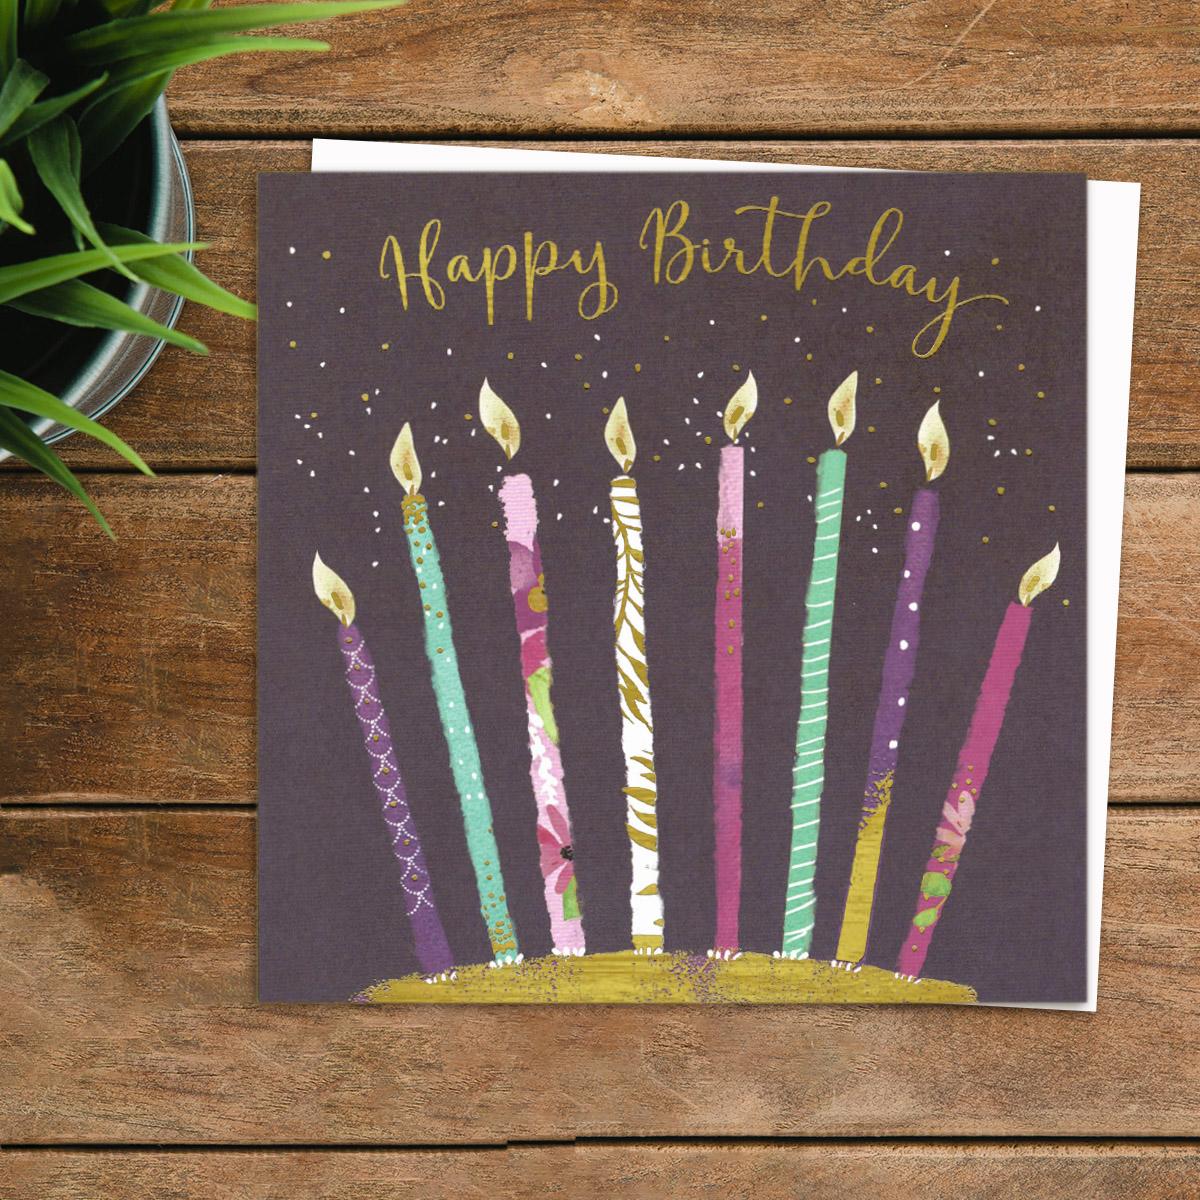 Damson Noire - Happy Birthday Candles Card Front Image